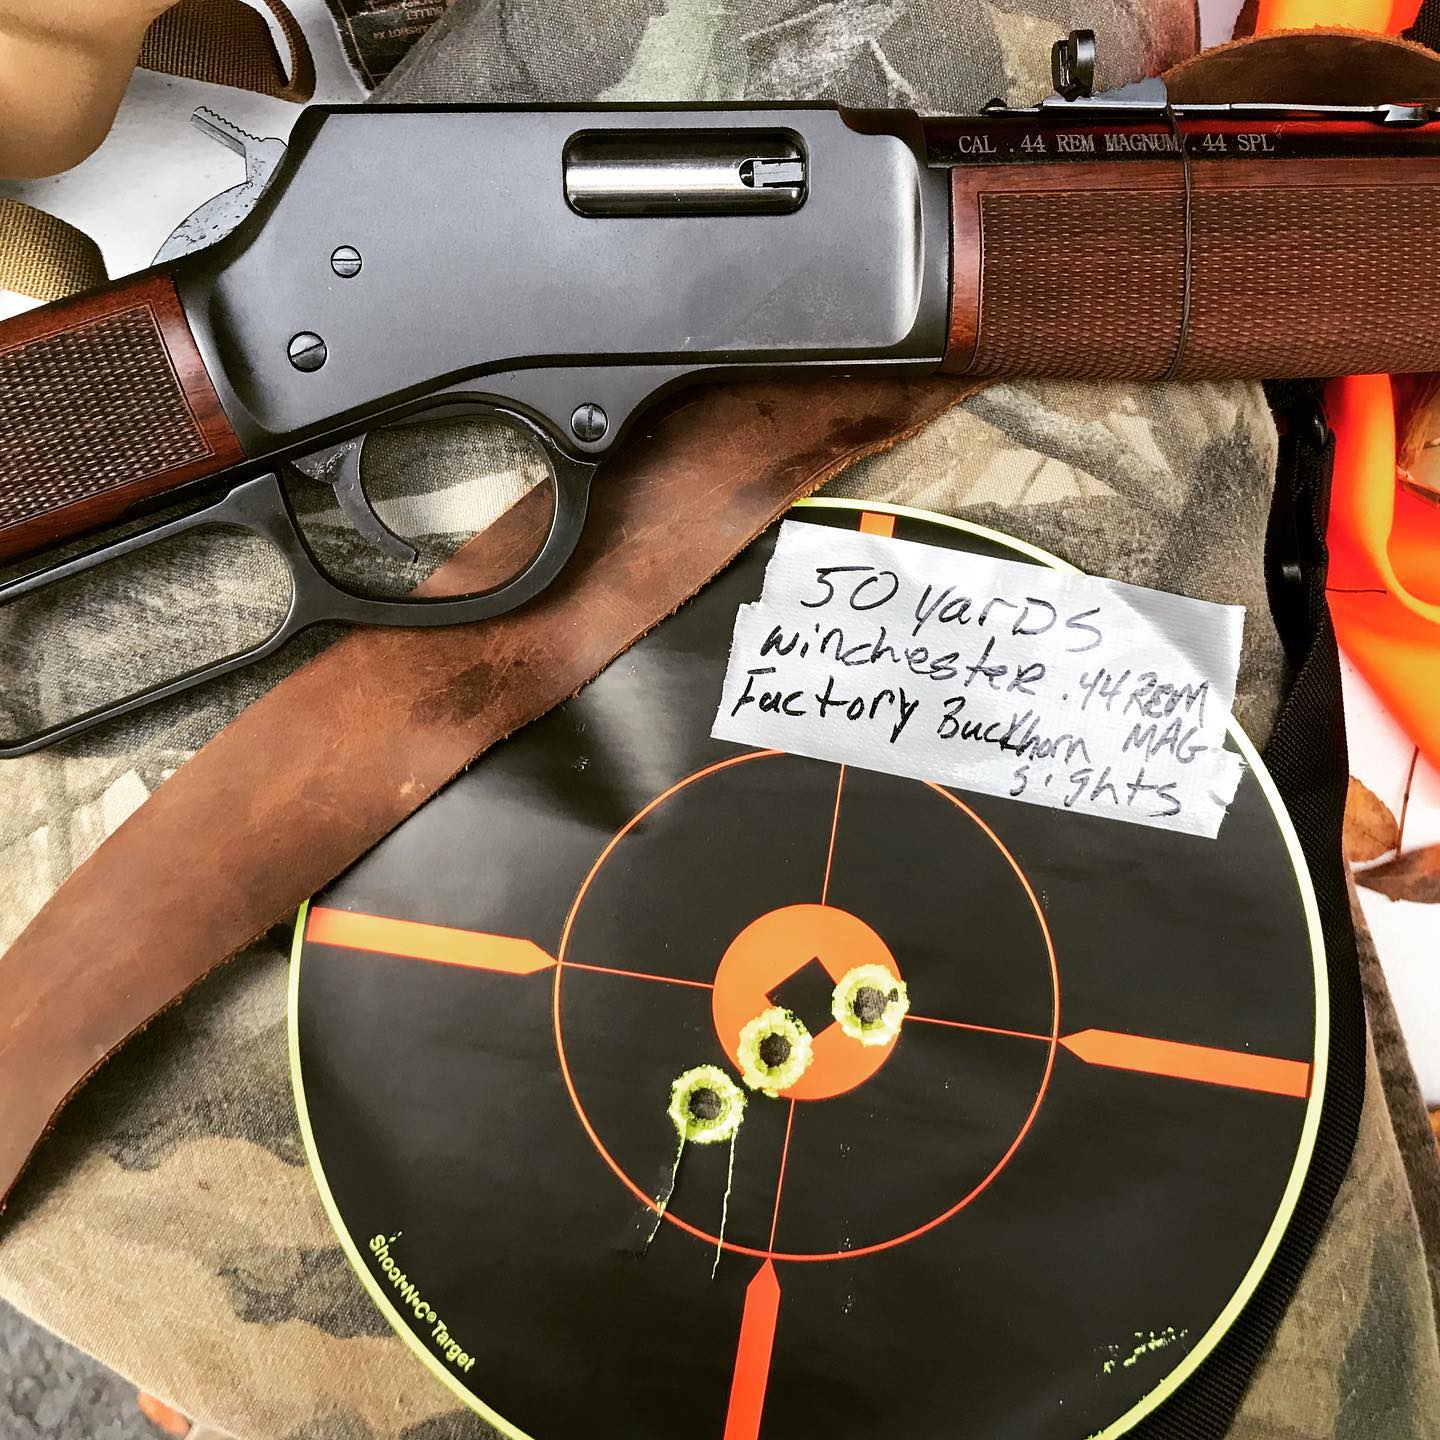 Rise of Lever-Action Rifles with Red Dot Sights - Petersen's Hunting